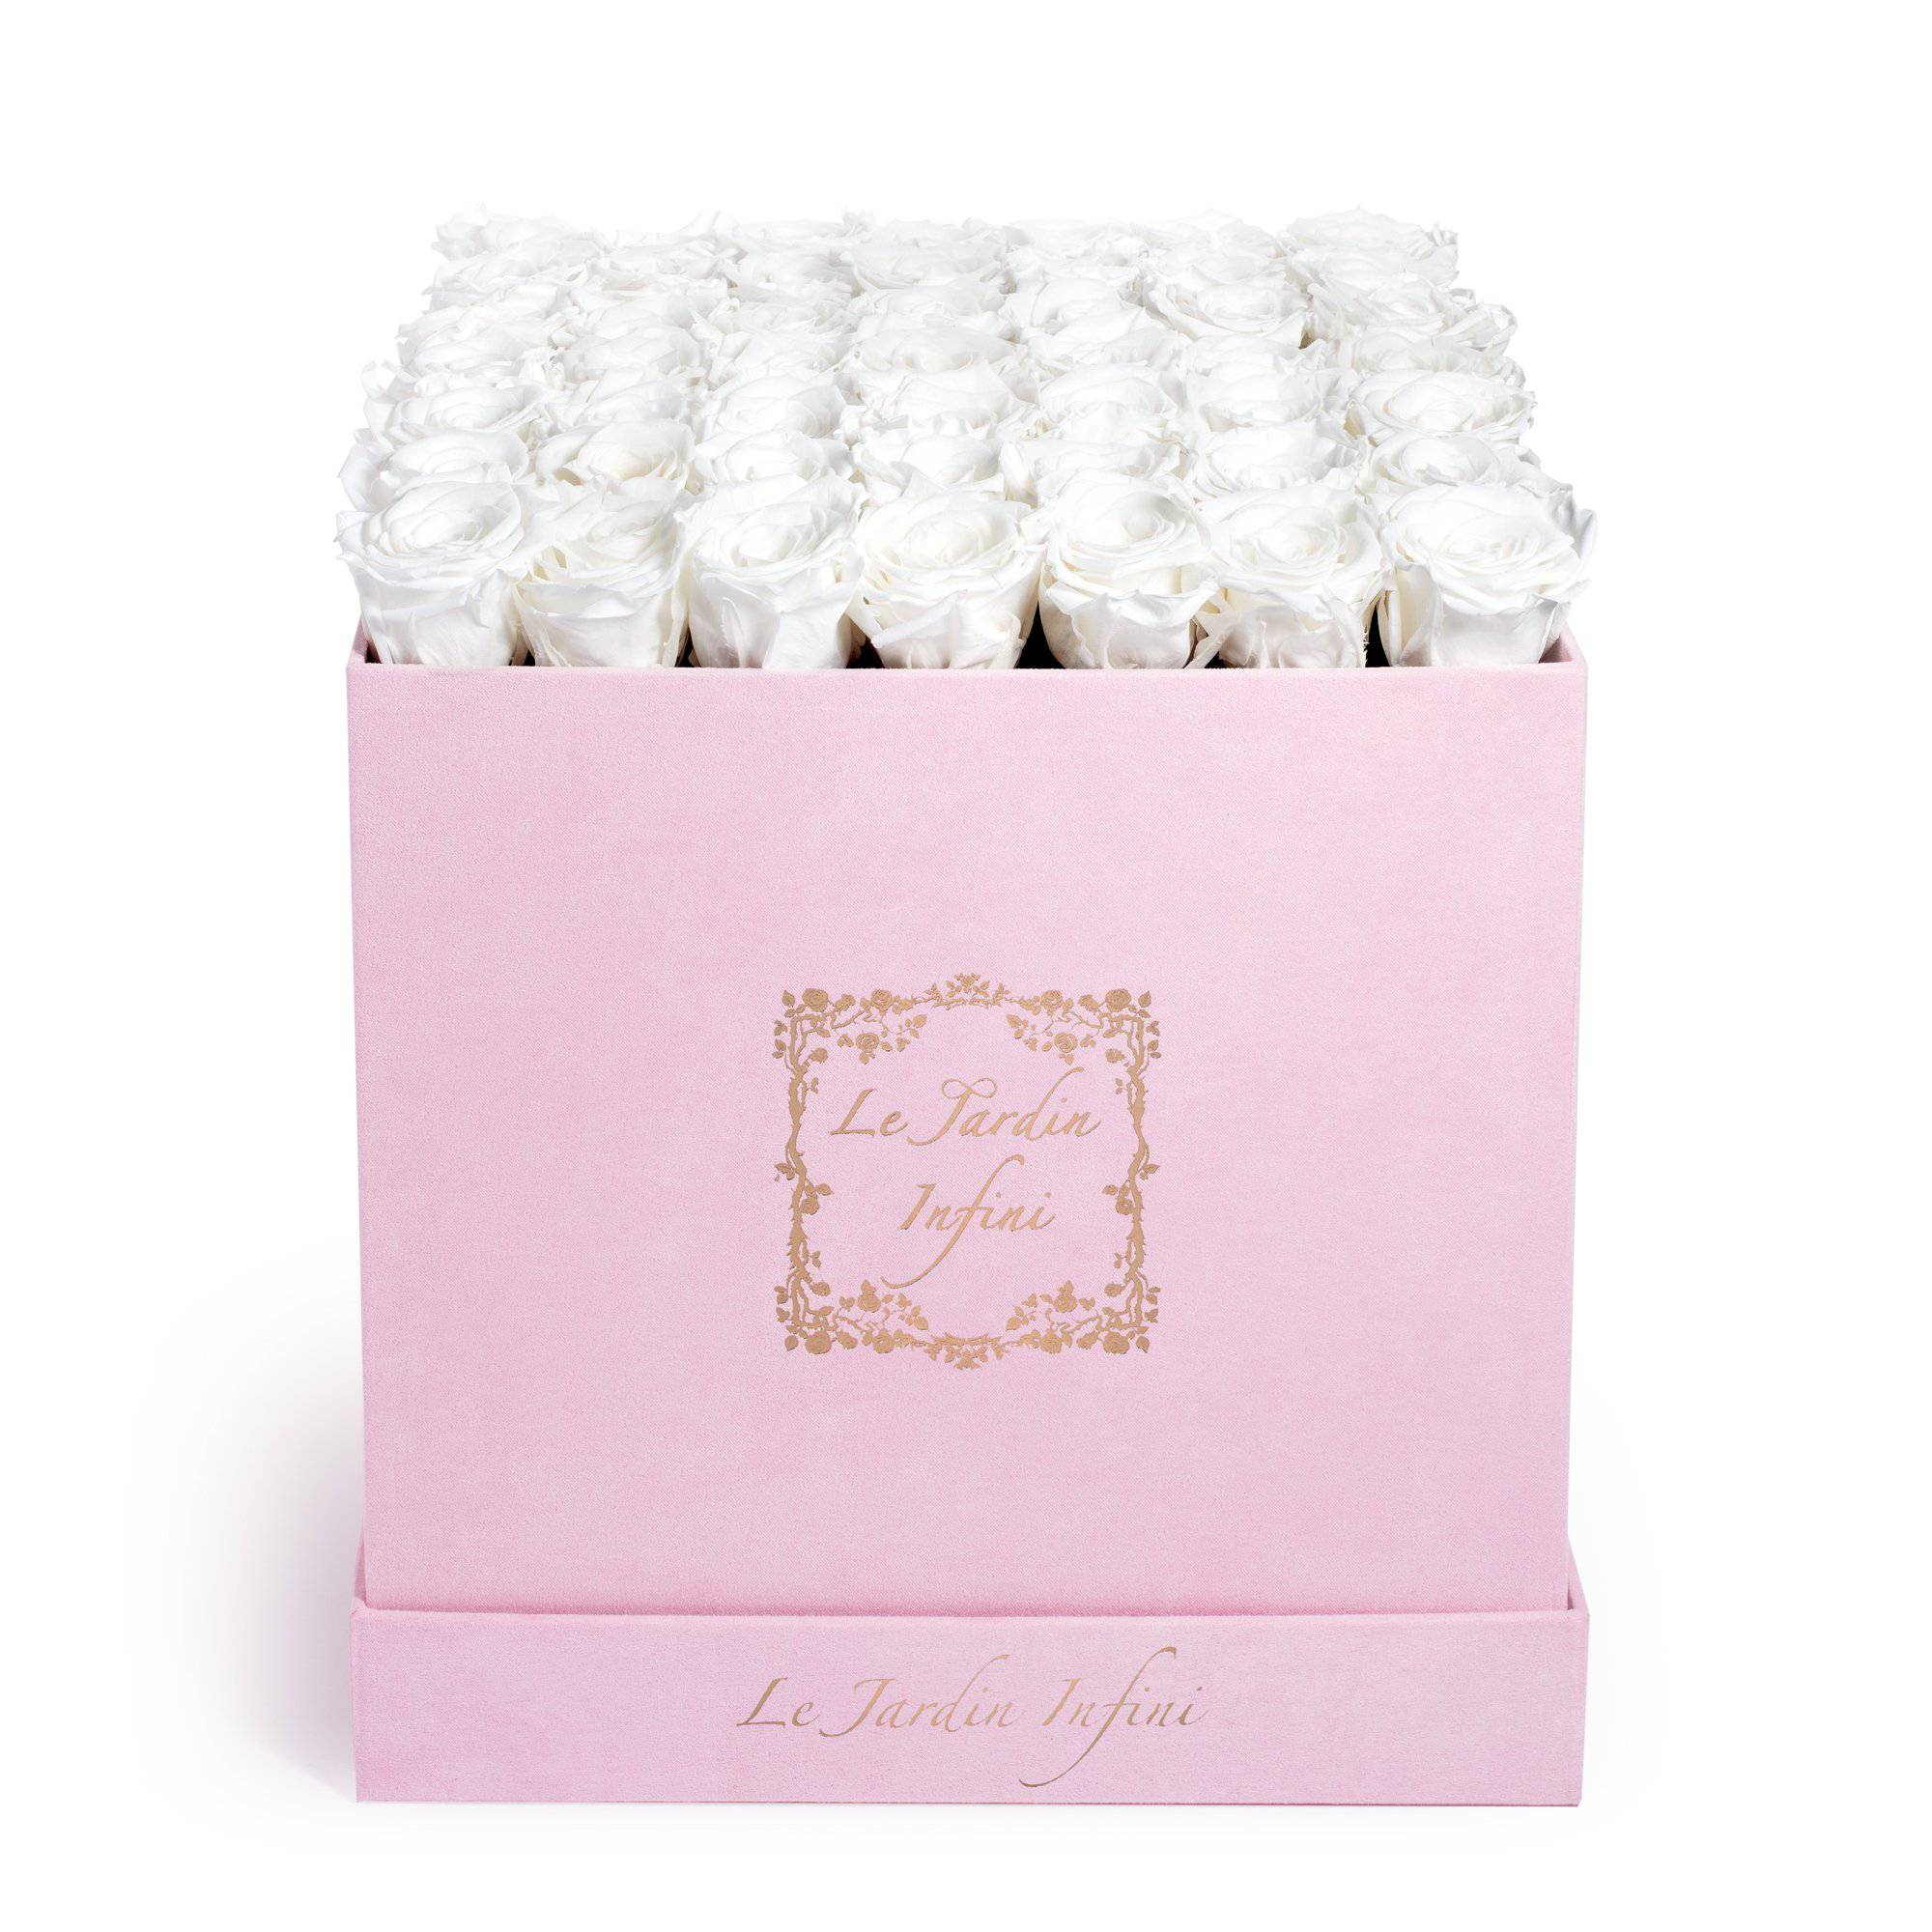 White Preserved Roses  - Large Square Luxury Pink Suede Box